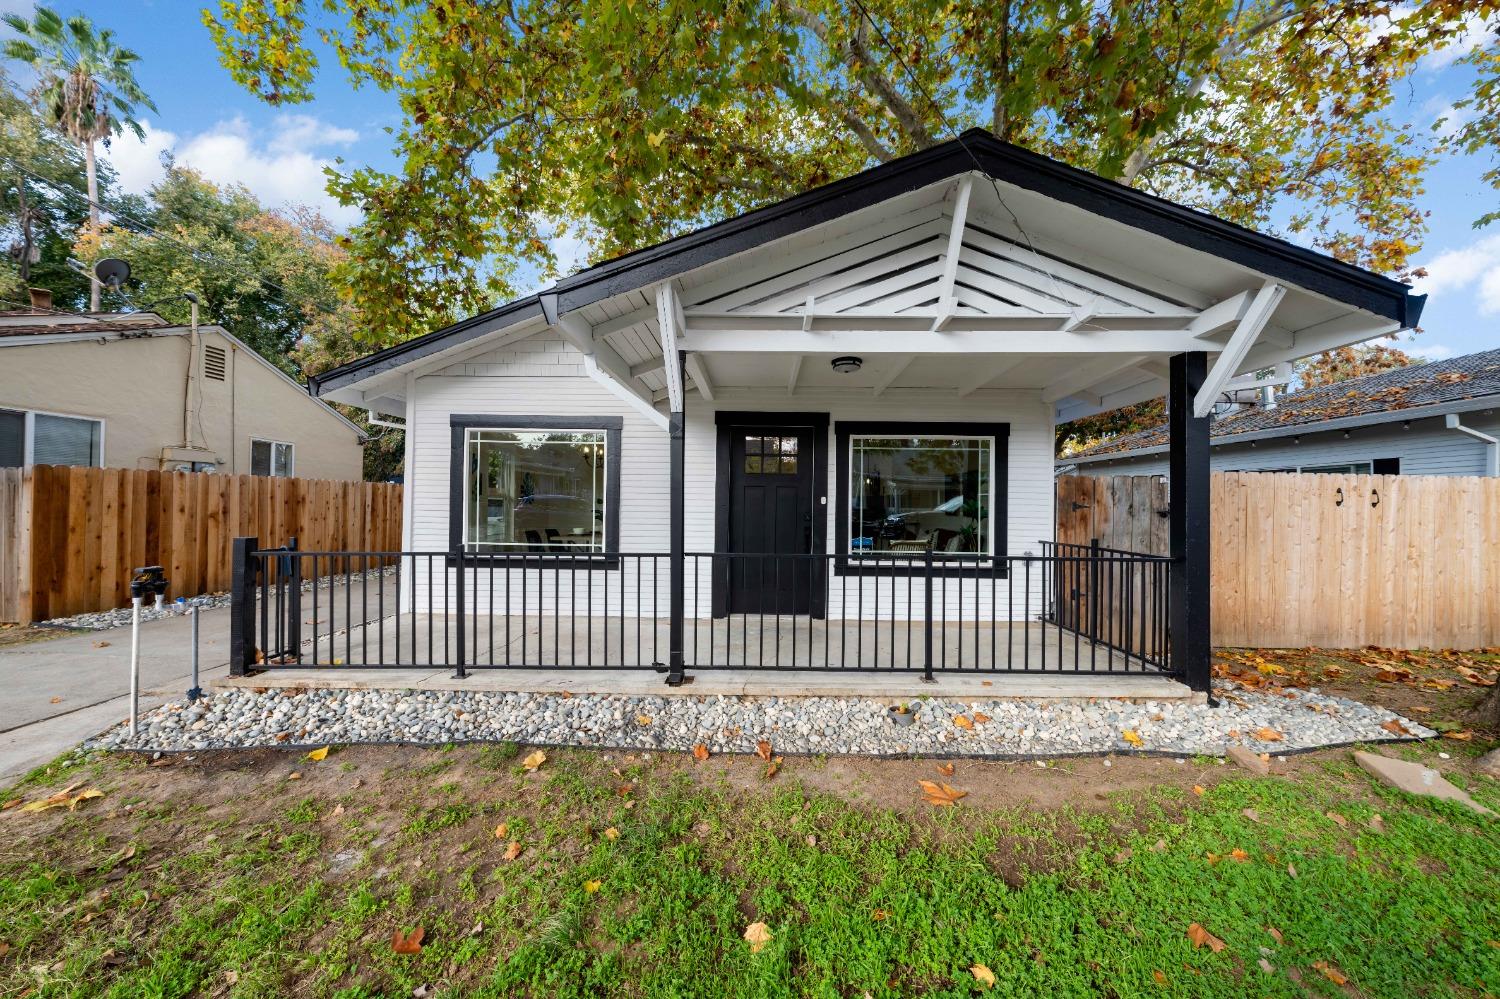 Welcome to this charming Curtis Park bungalow, this cozy cottage-style home offers the perfect blend